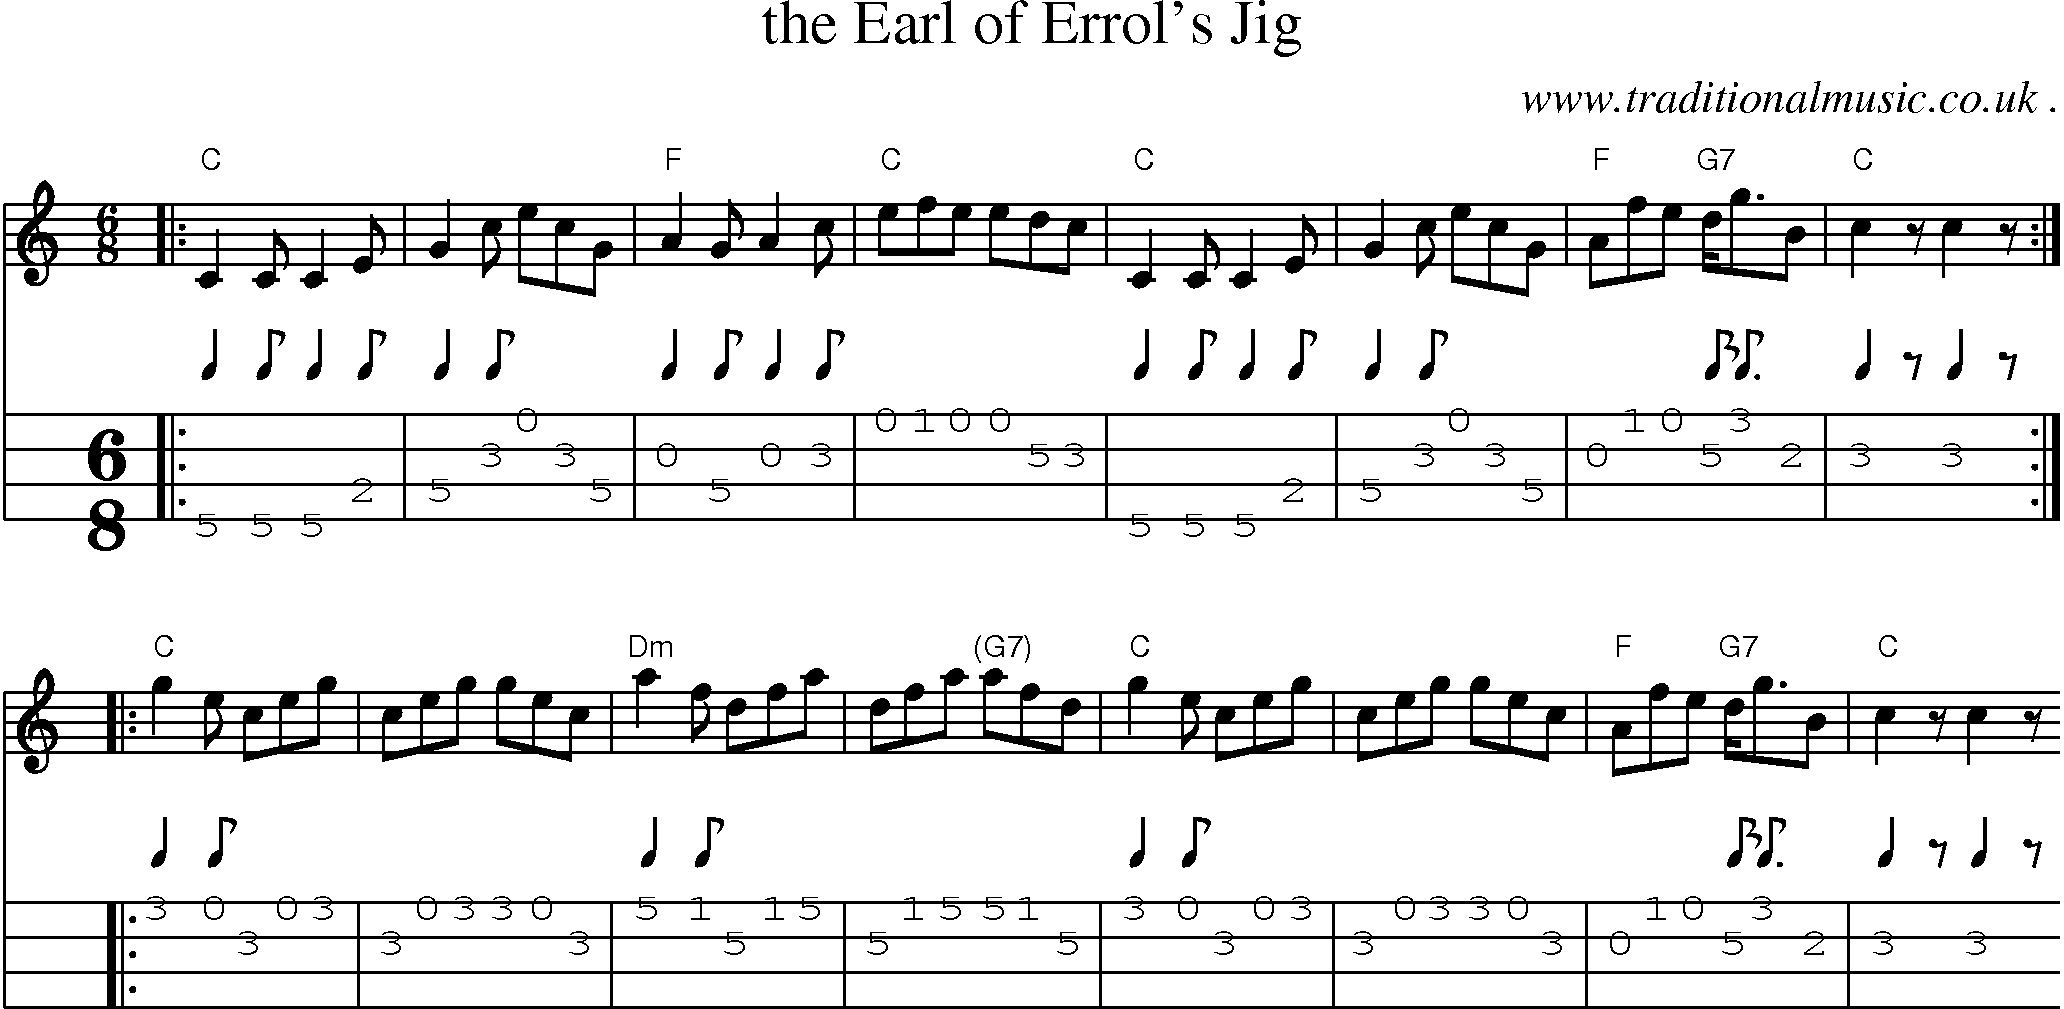 Sheet-music  score, Chords and Mandolin Tabs for The Earl Of Errols Jig